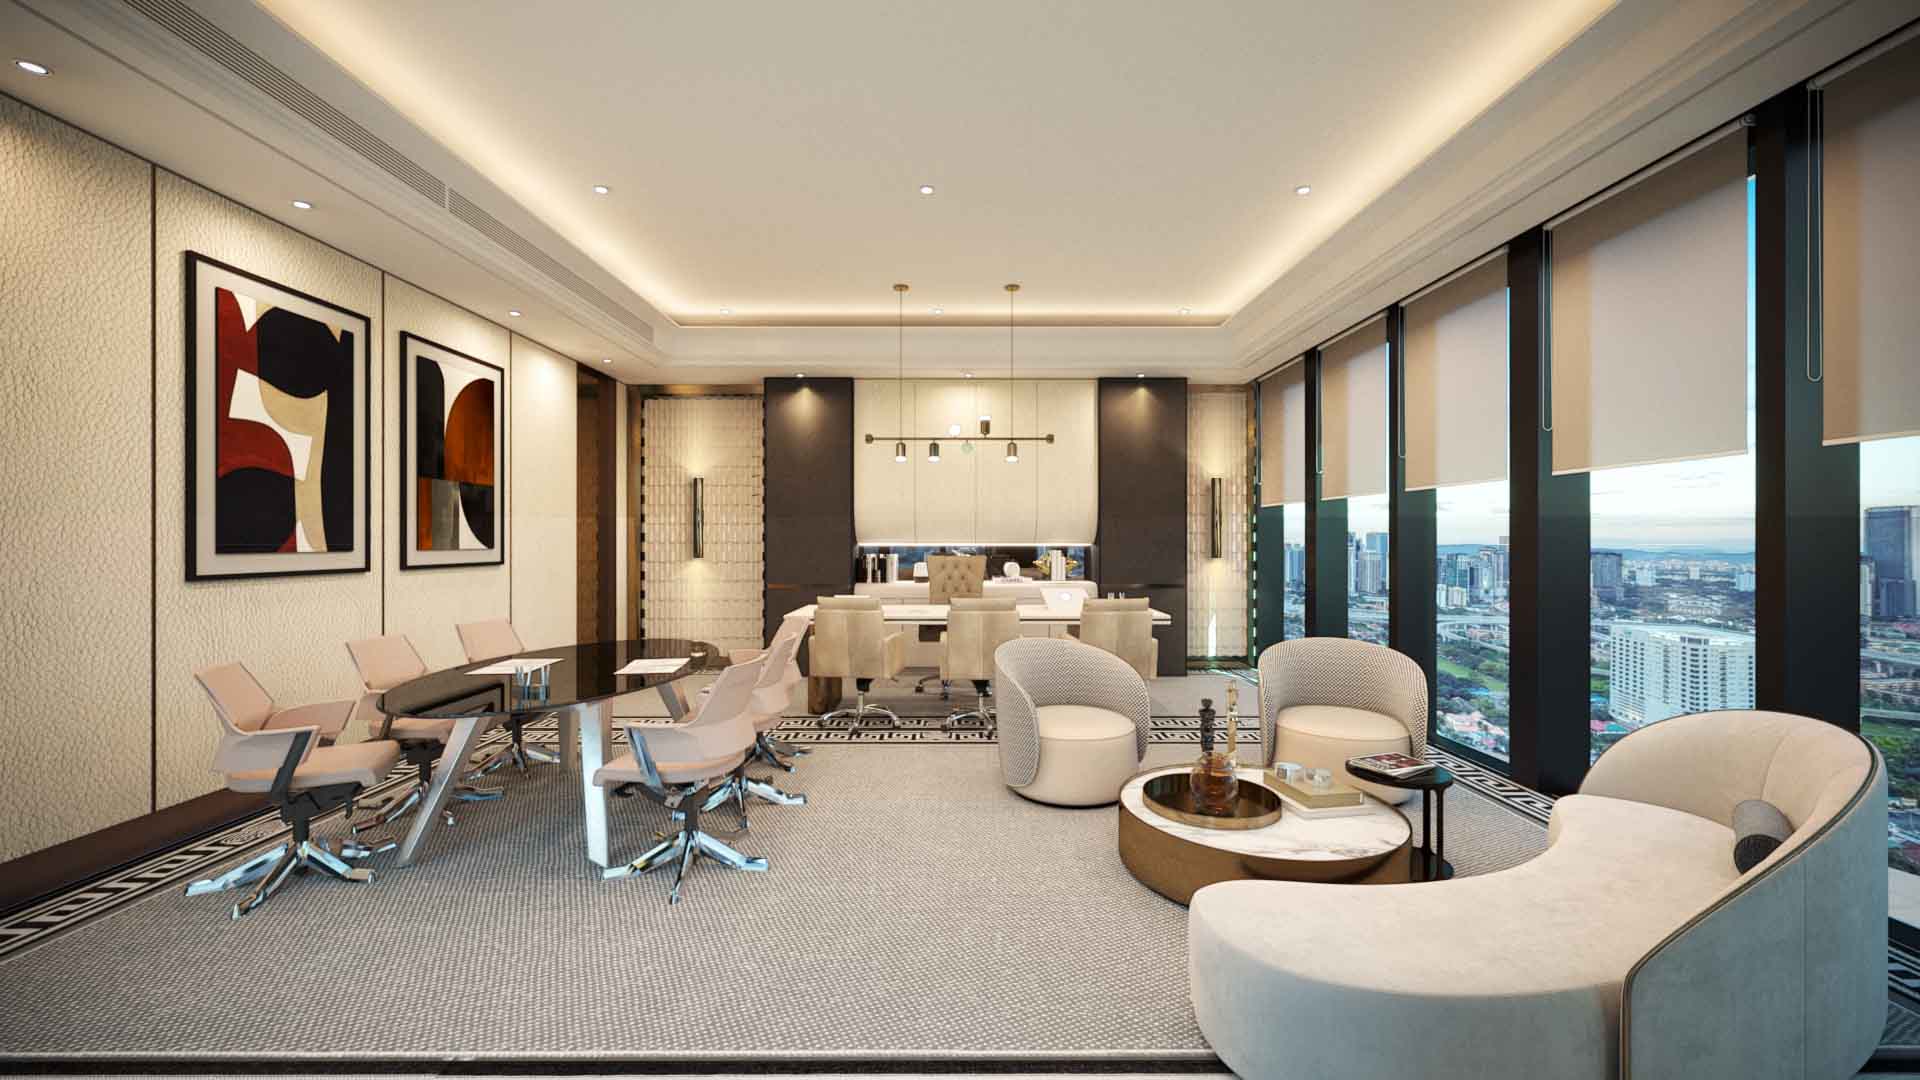 Contemporary KL office space featuring minimalist design and ergonomic furniture, crafted by Blaine Robert Design.